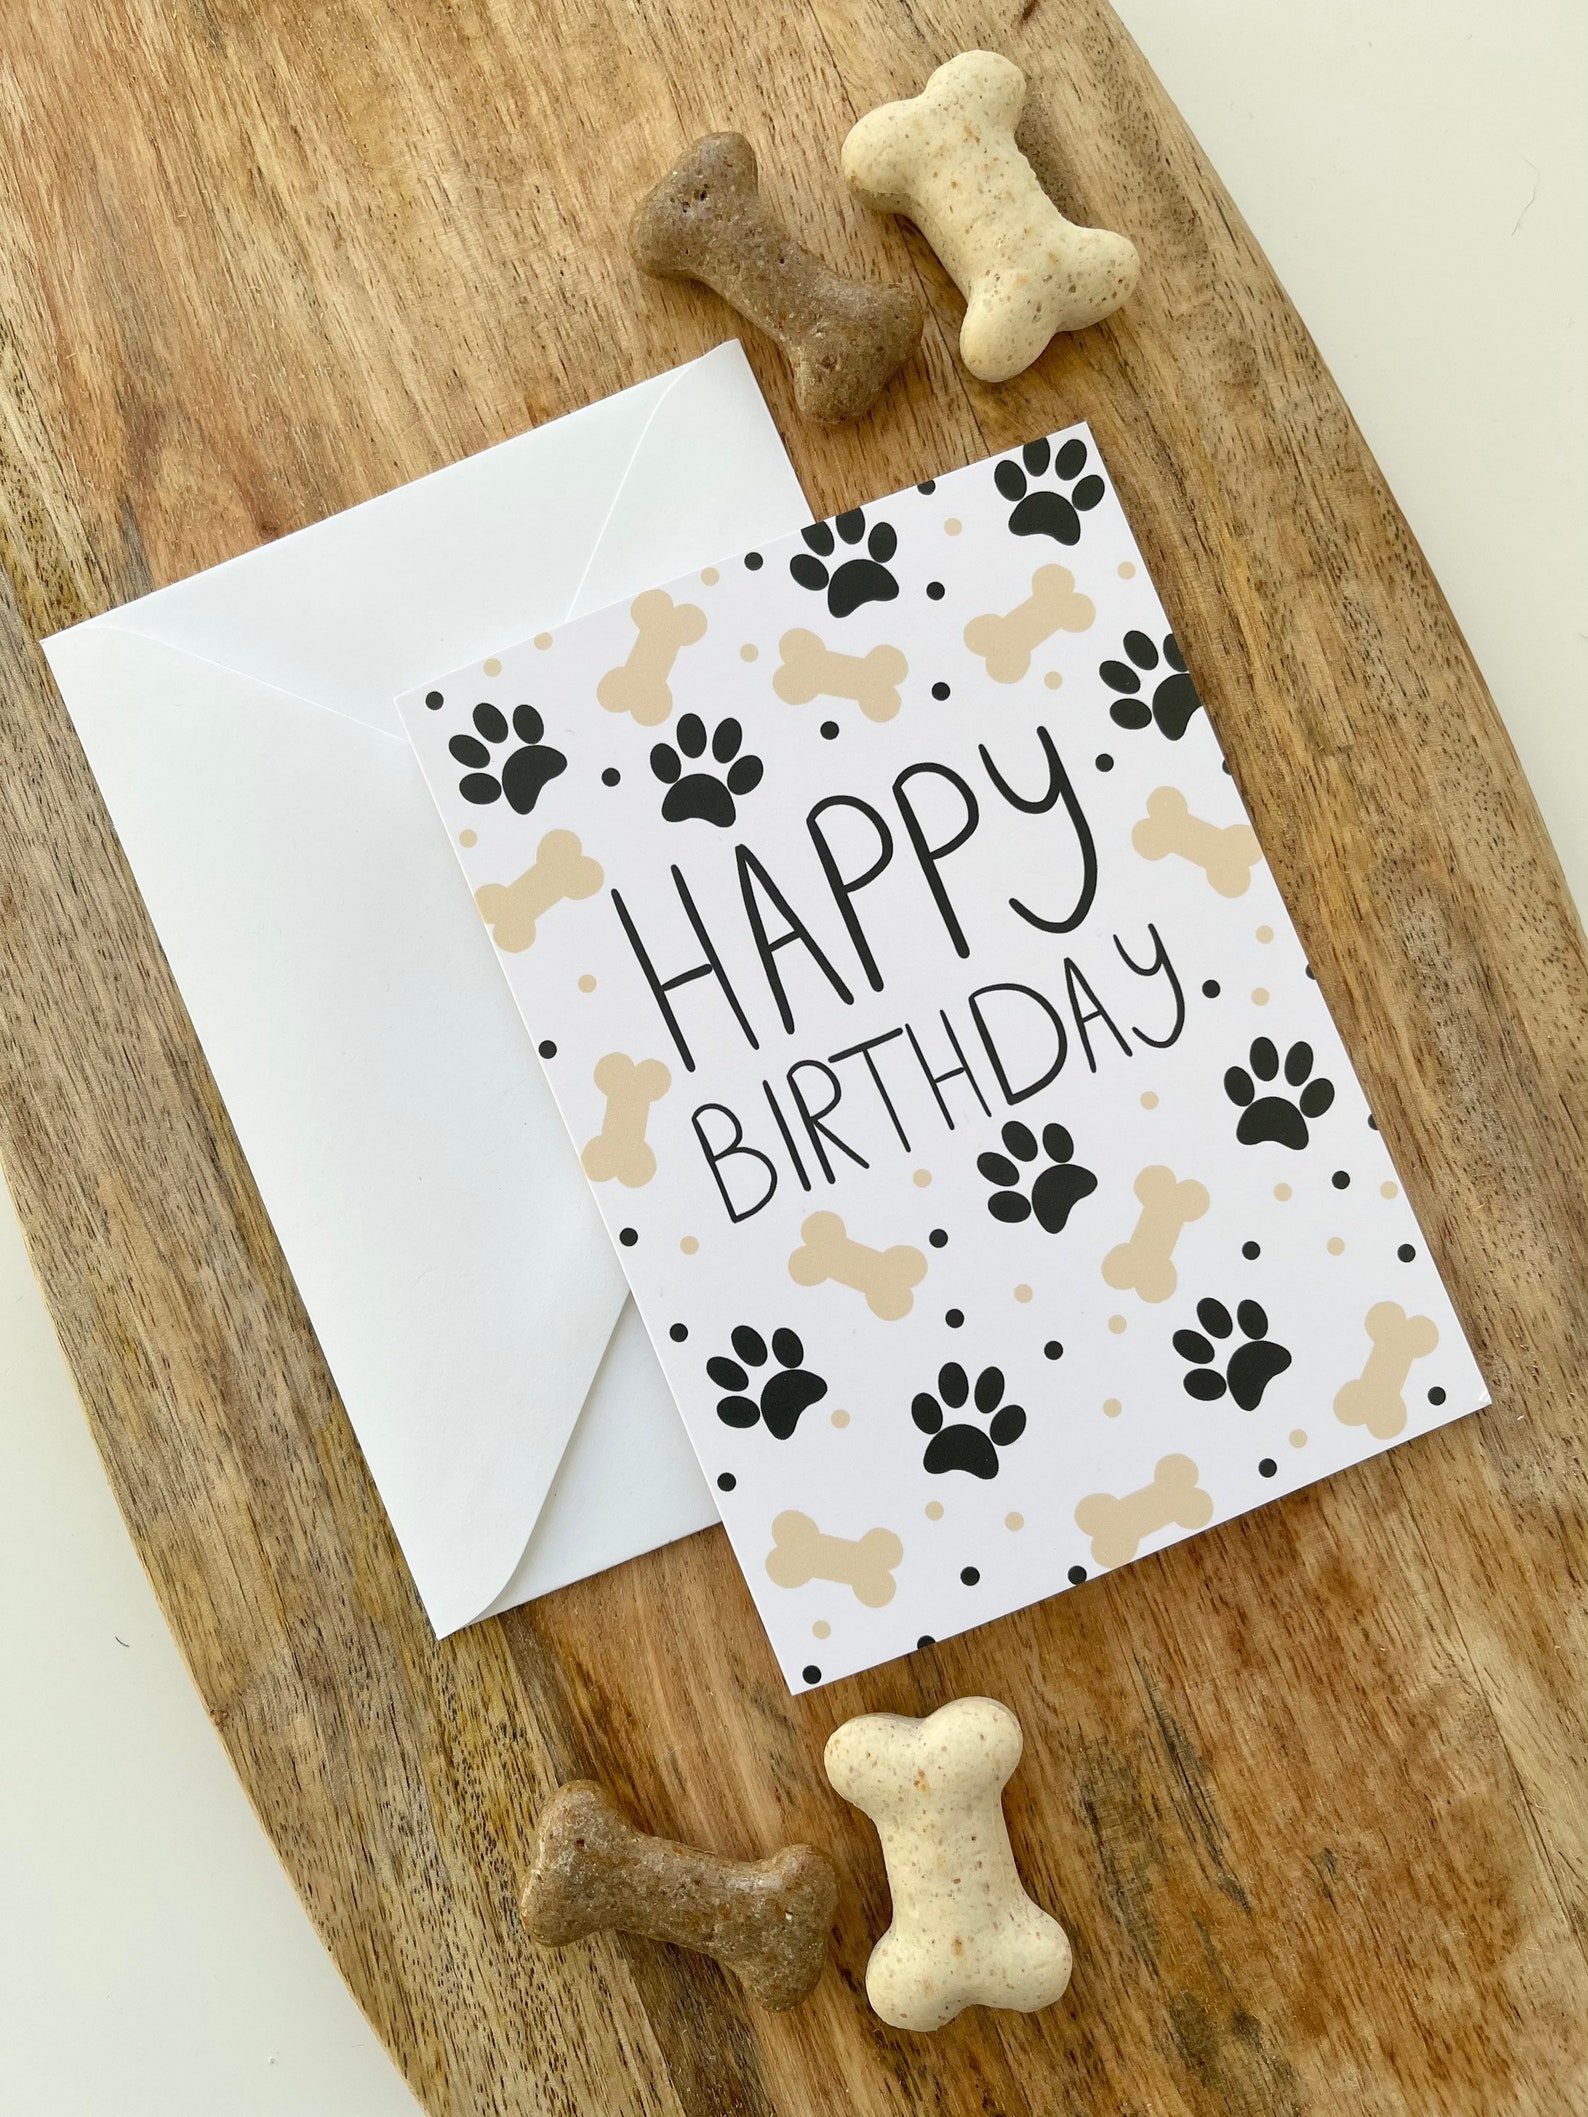 Animal Themed Birthday Cards Cats and Dogs Animal Lovercute - Etsy